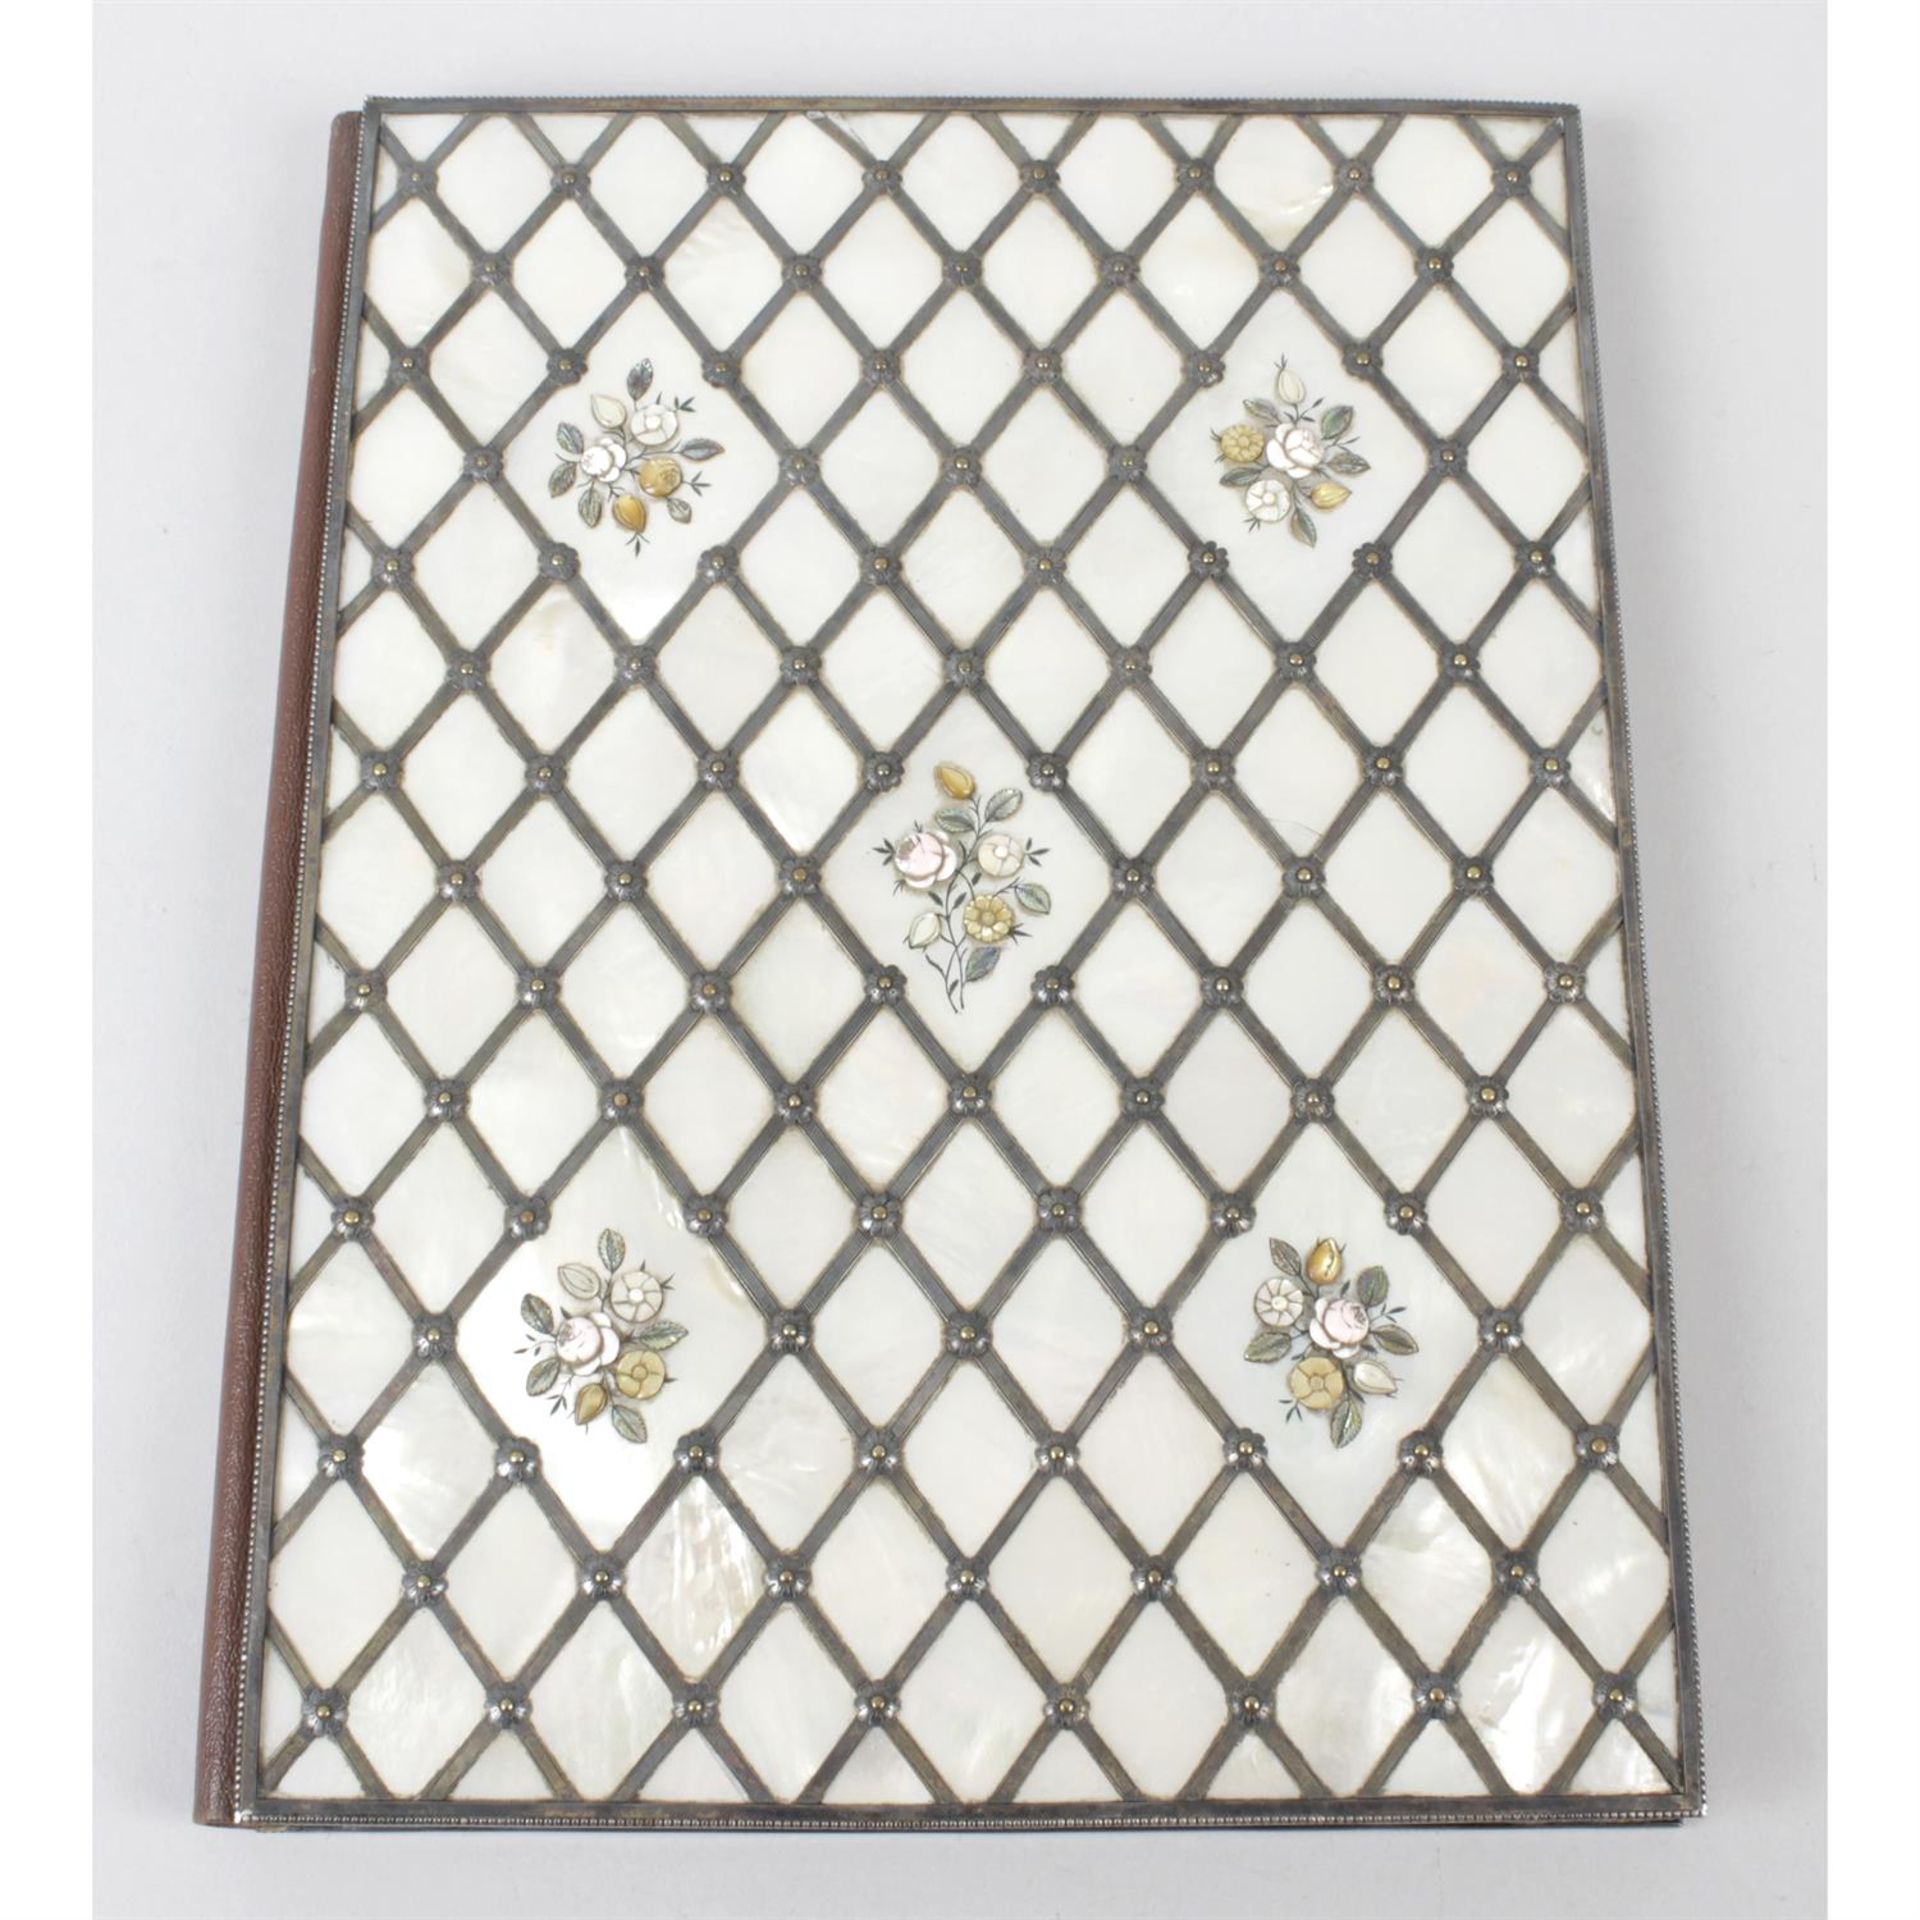 An early 20th century bound blotter with mother of pearl decoration.